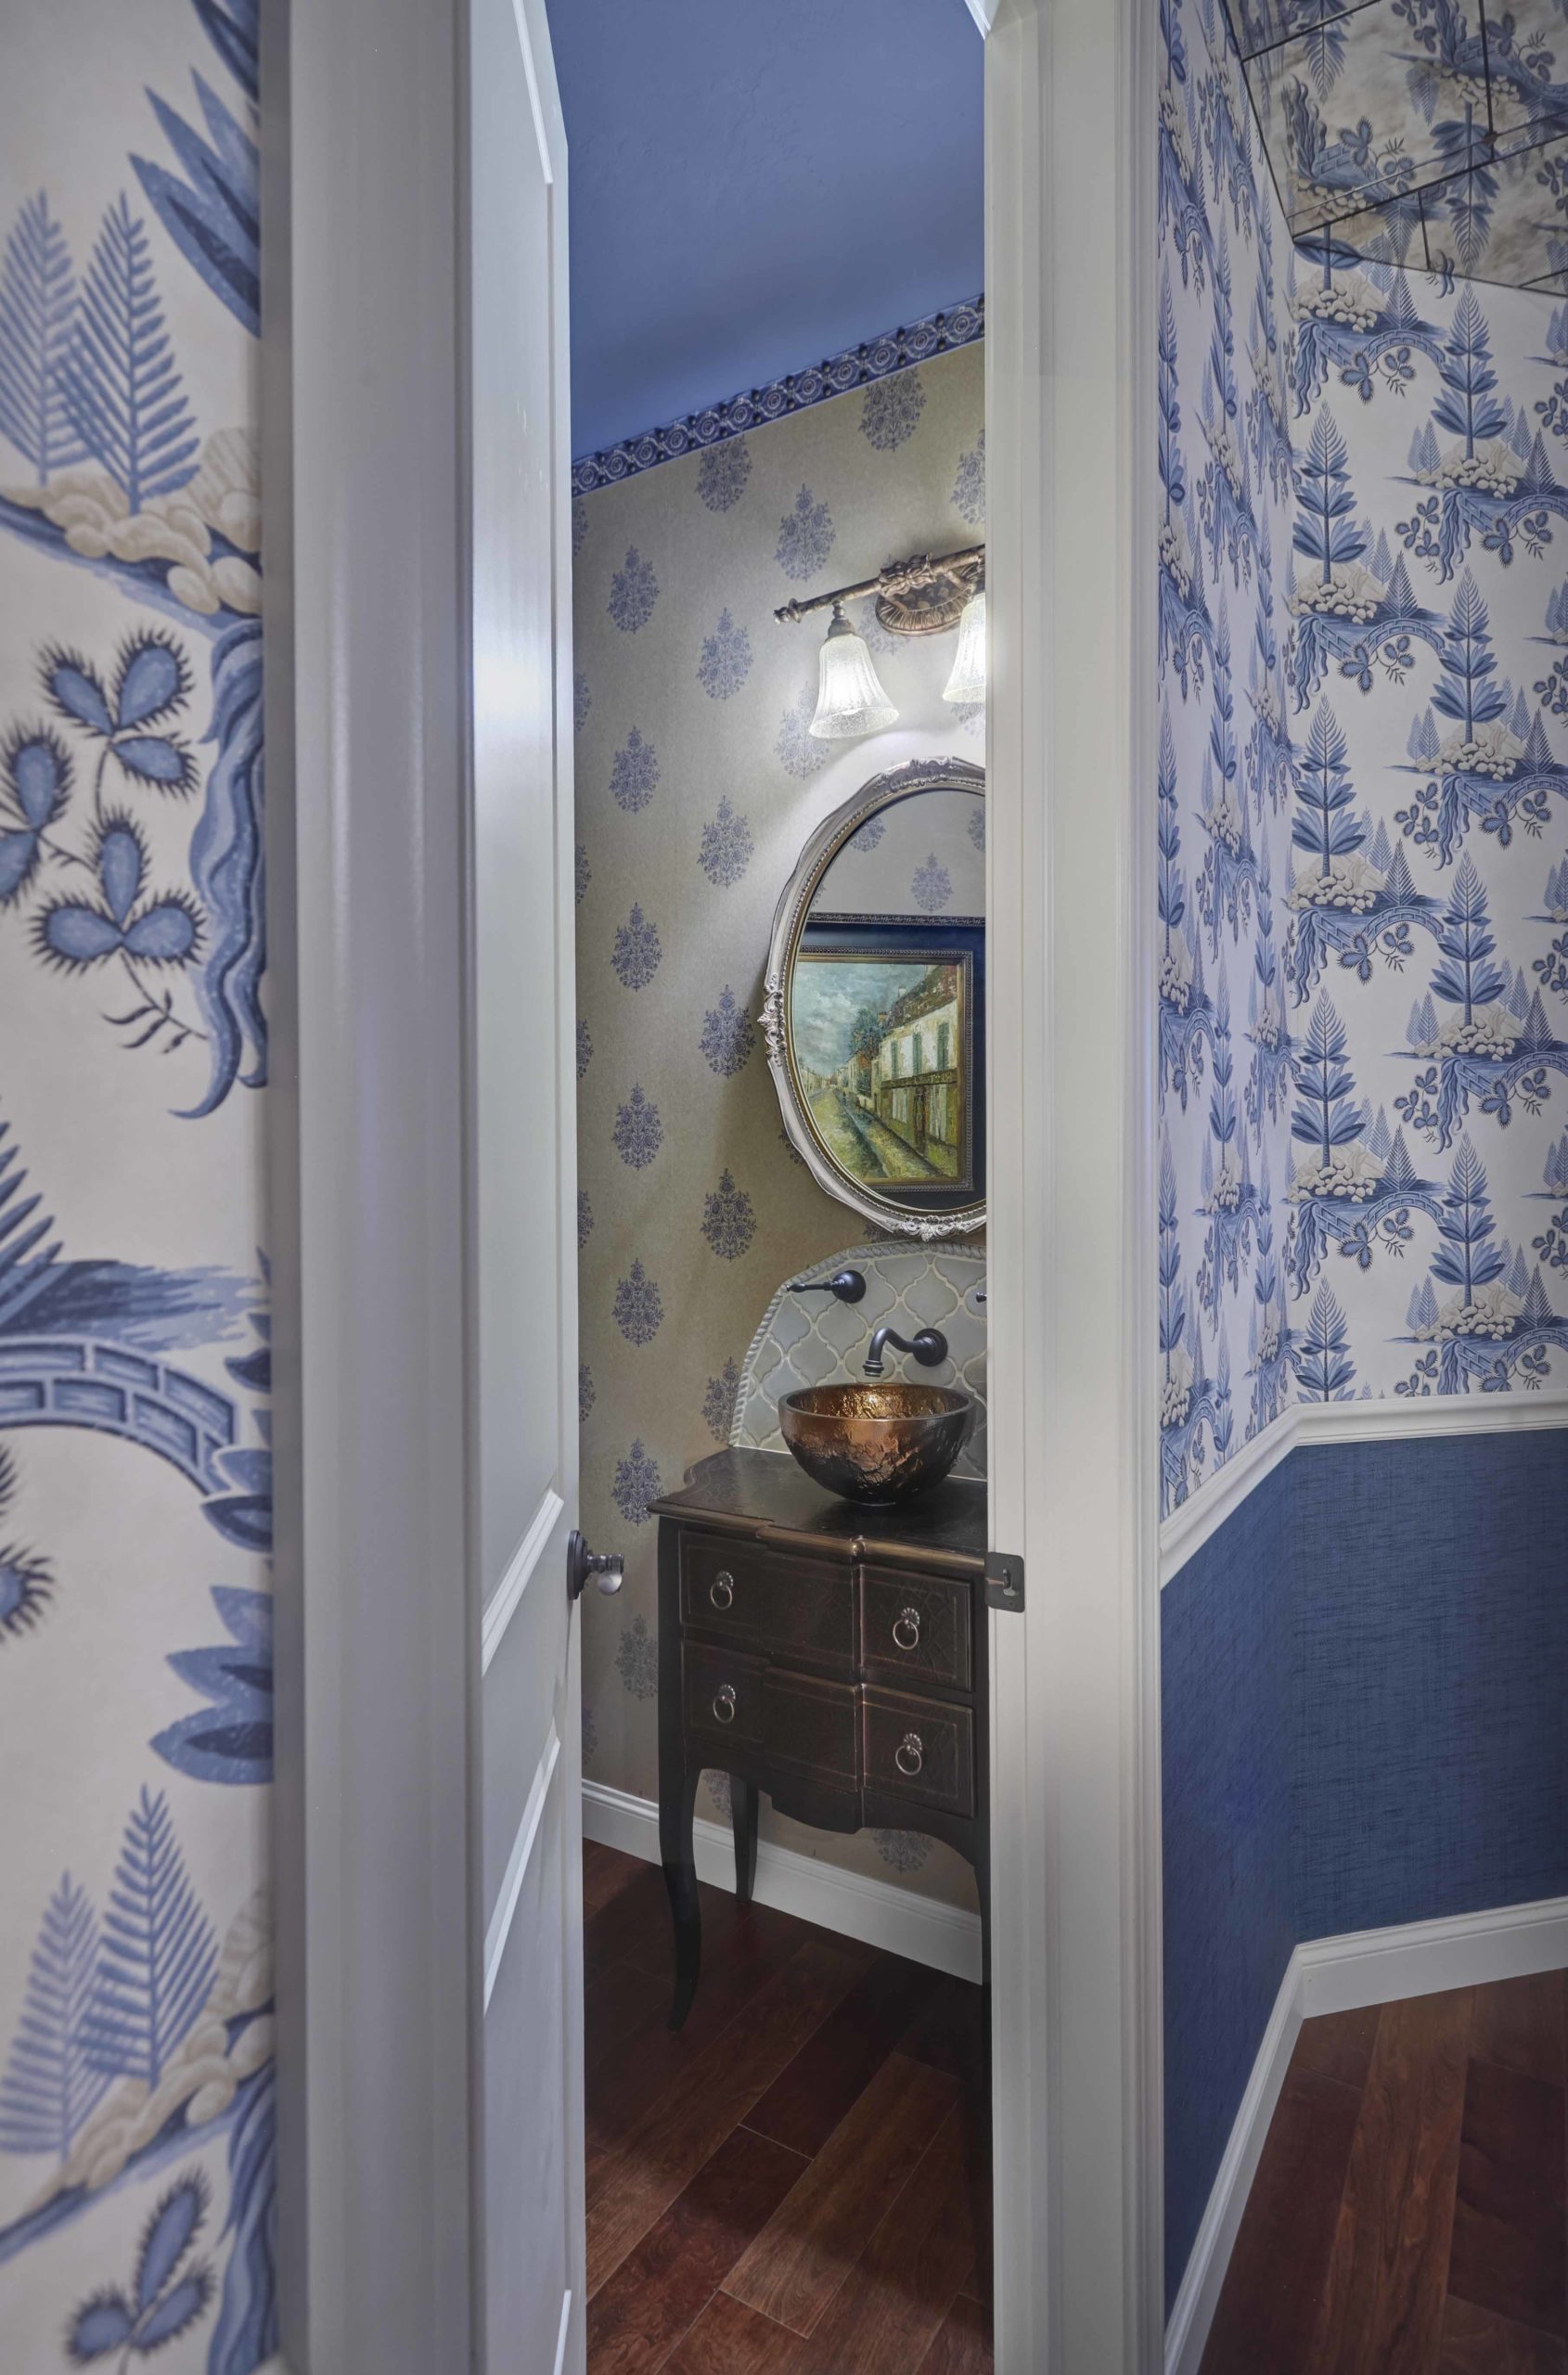 Close up of walls with blue and white wallpaper and a white door opening